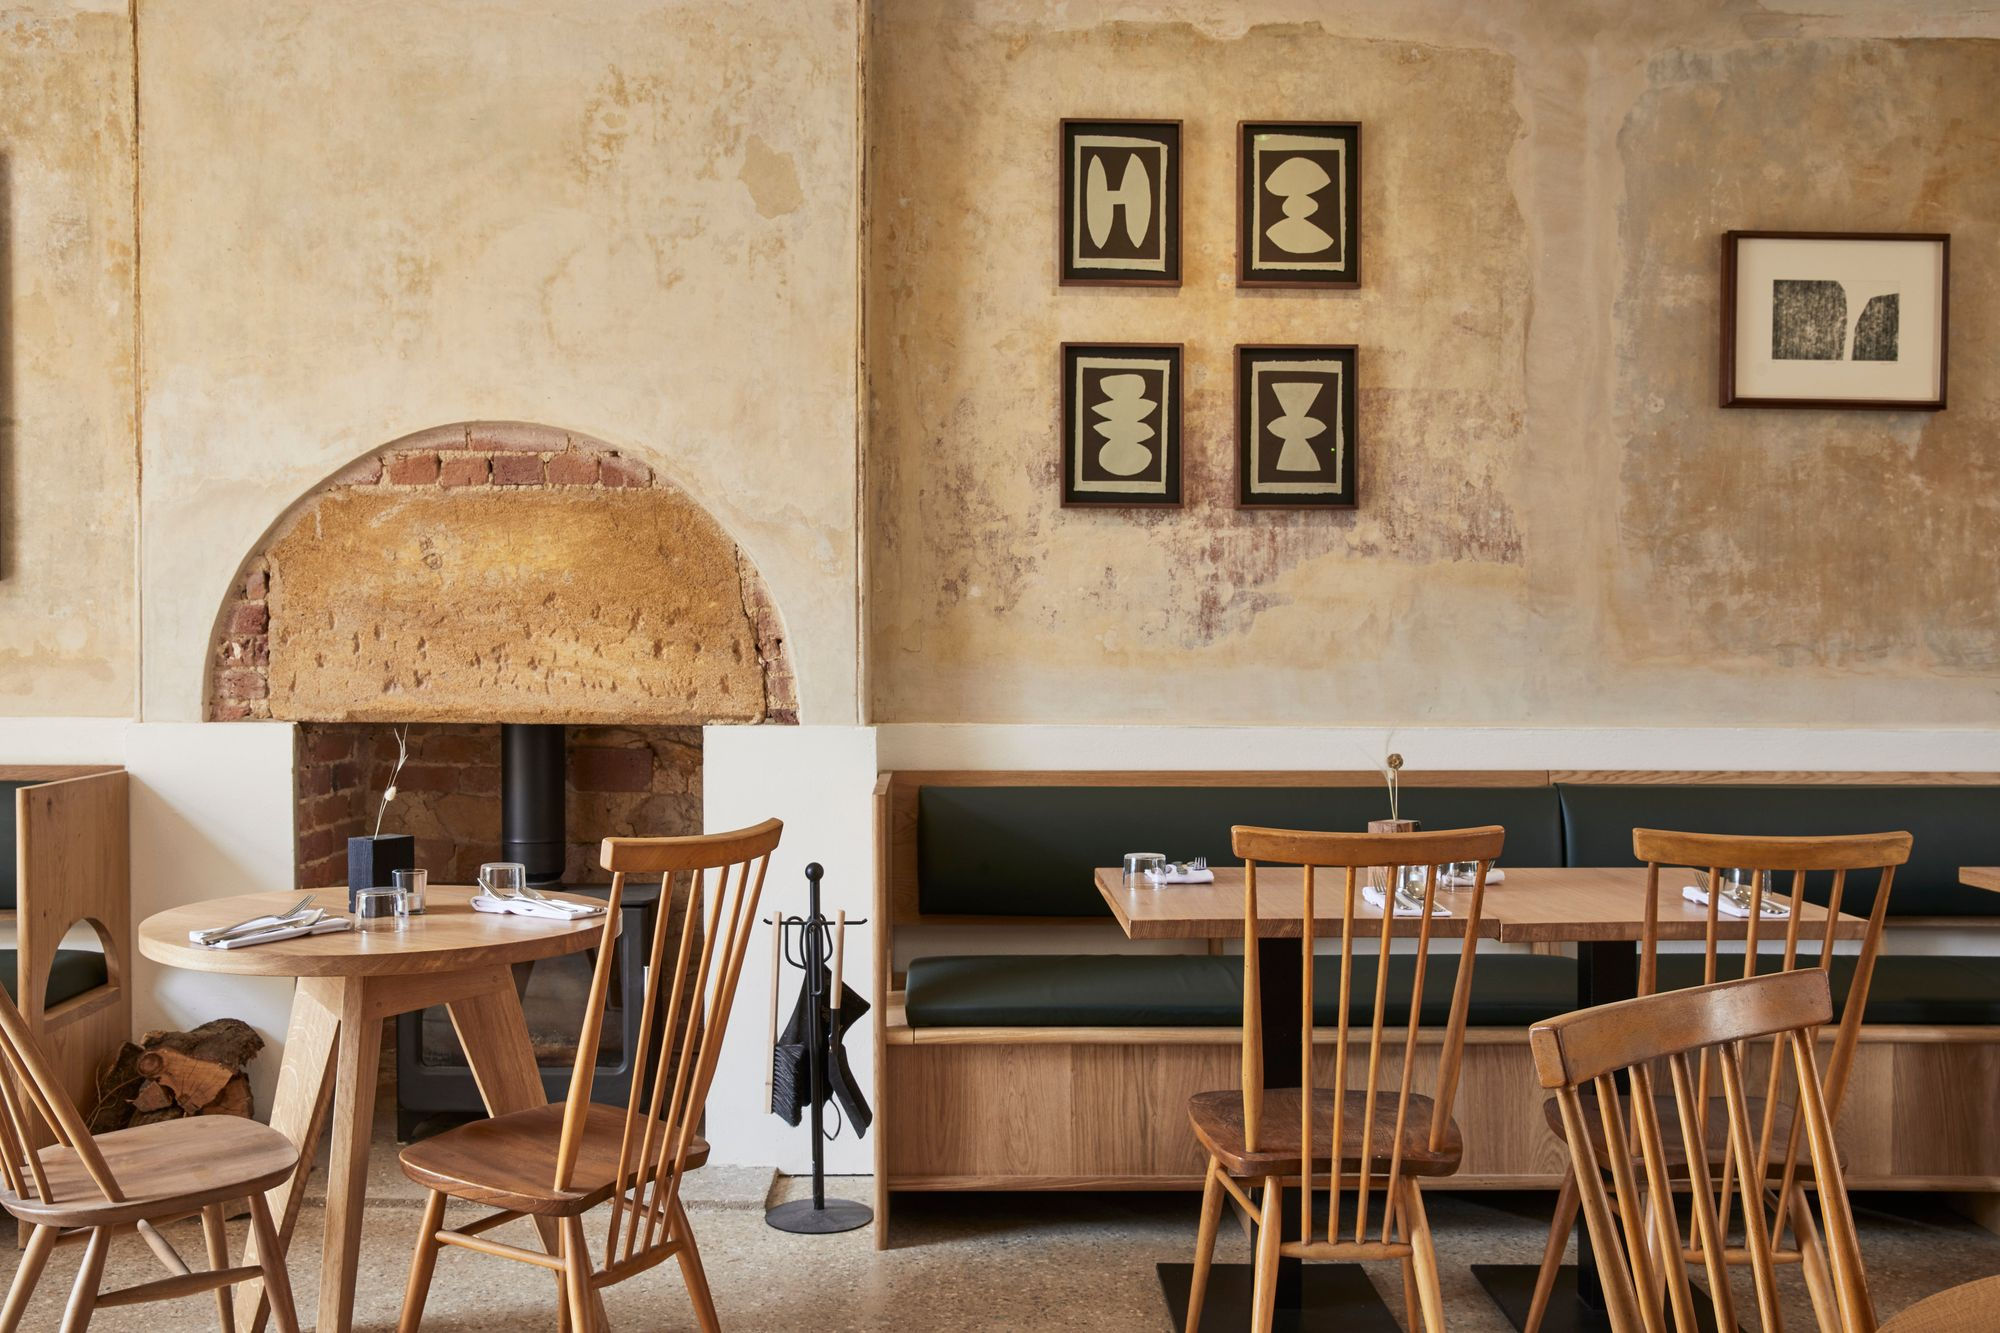 Holm:ARestaurantWithRooms,Where"SimplicityRules"-Remodelista